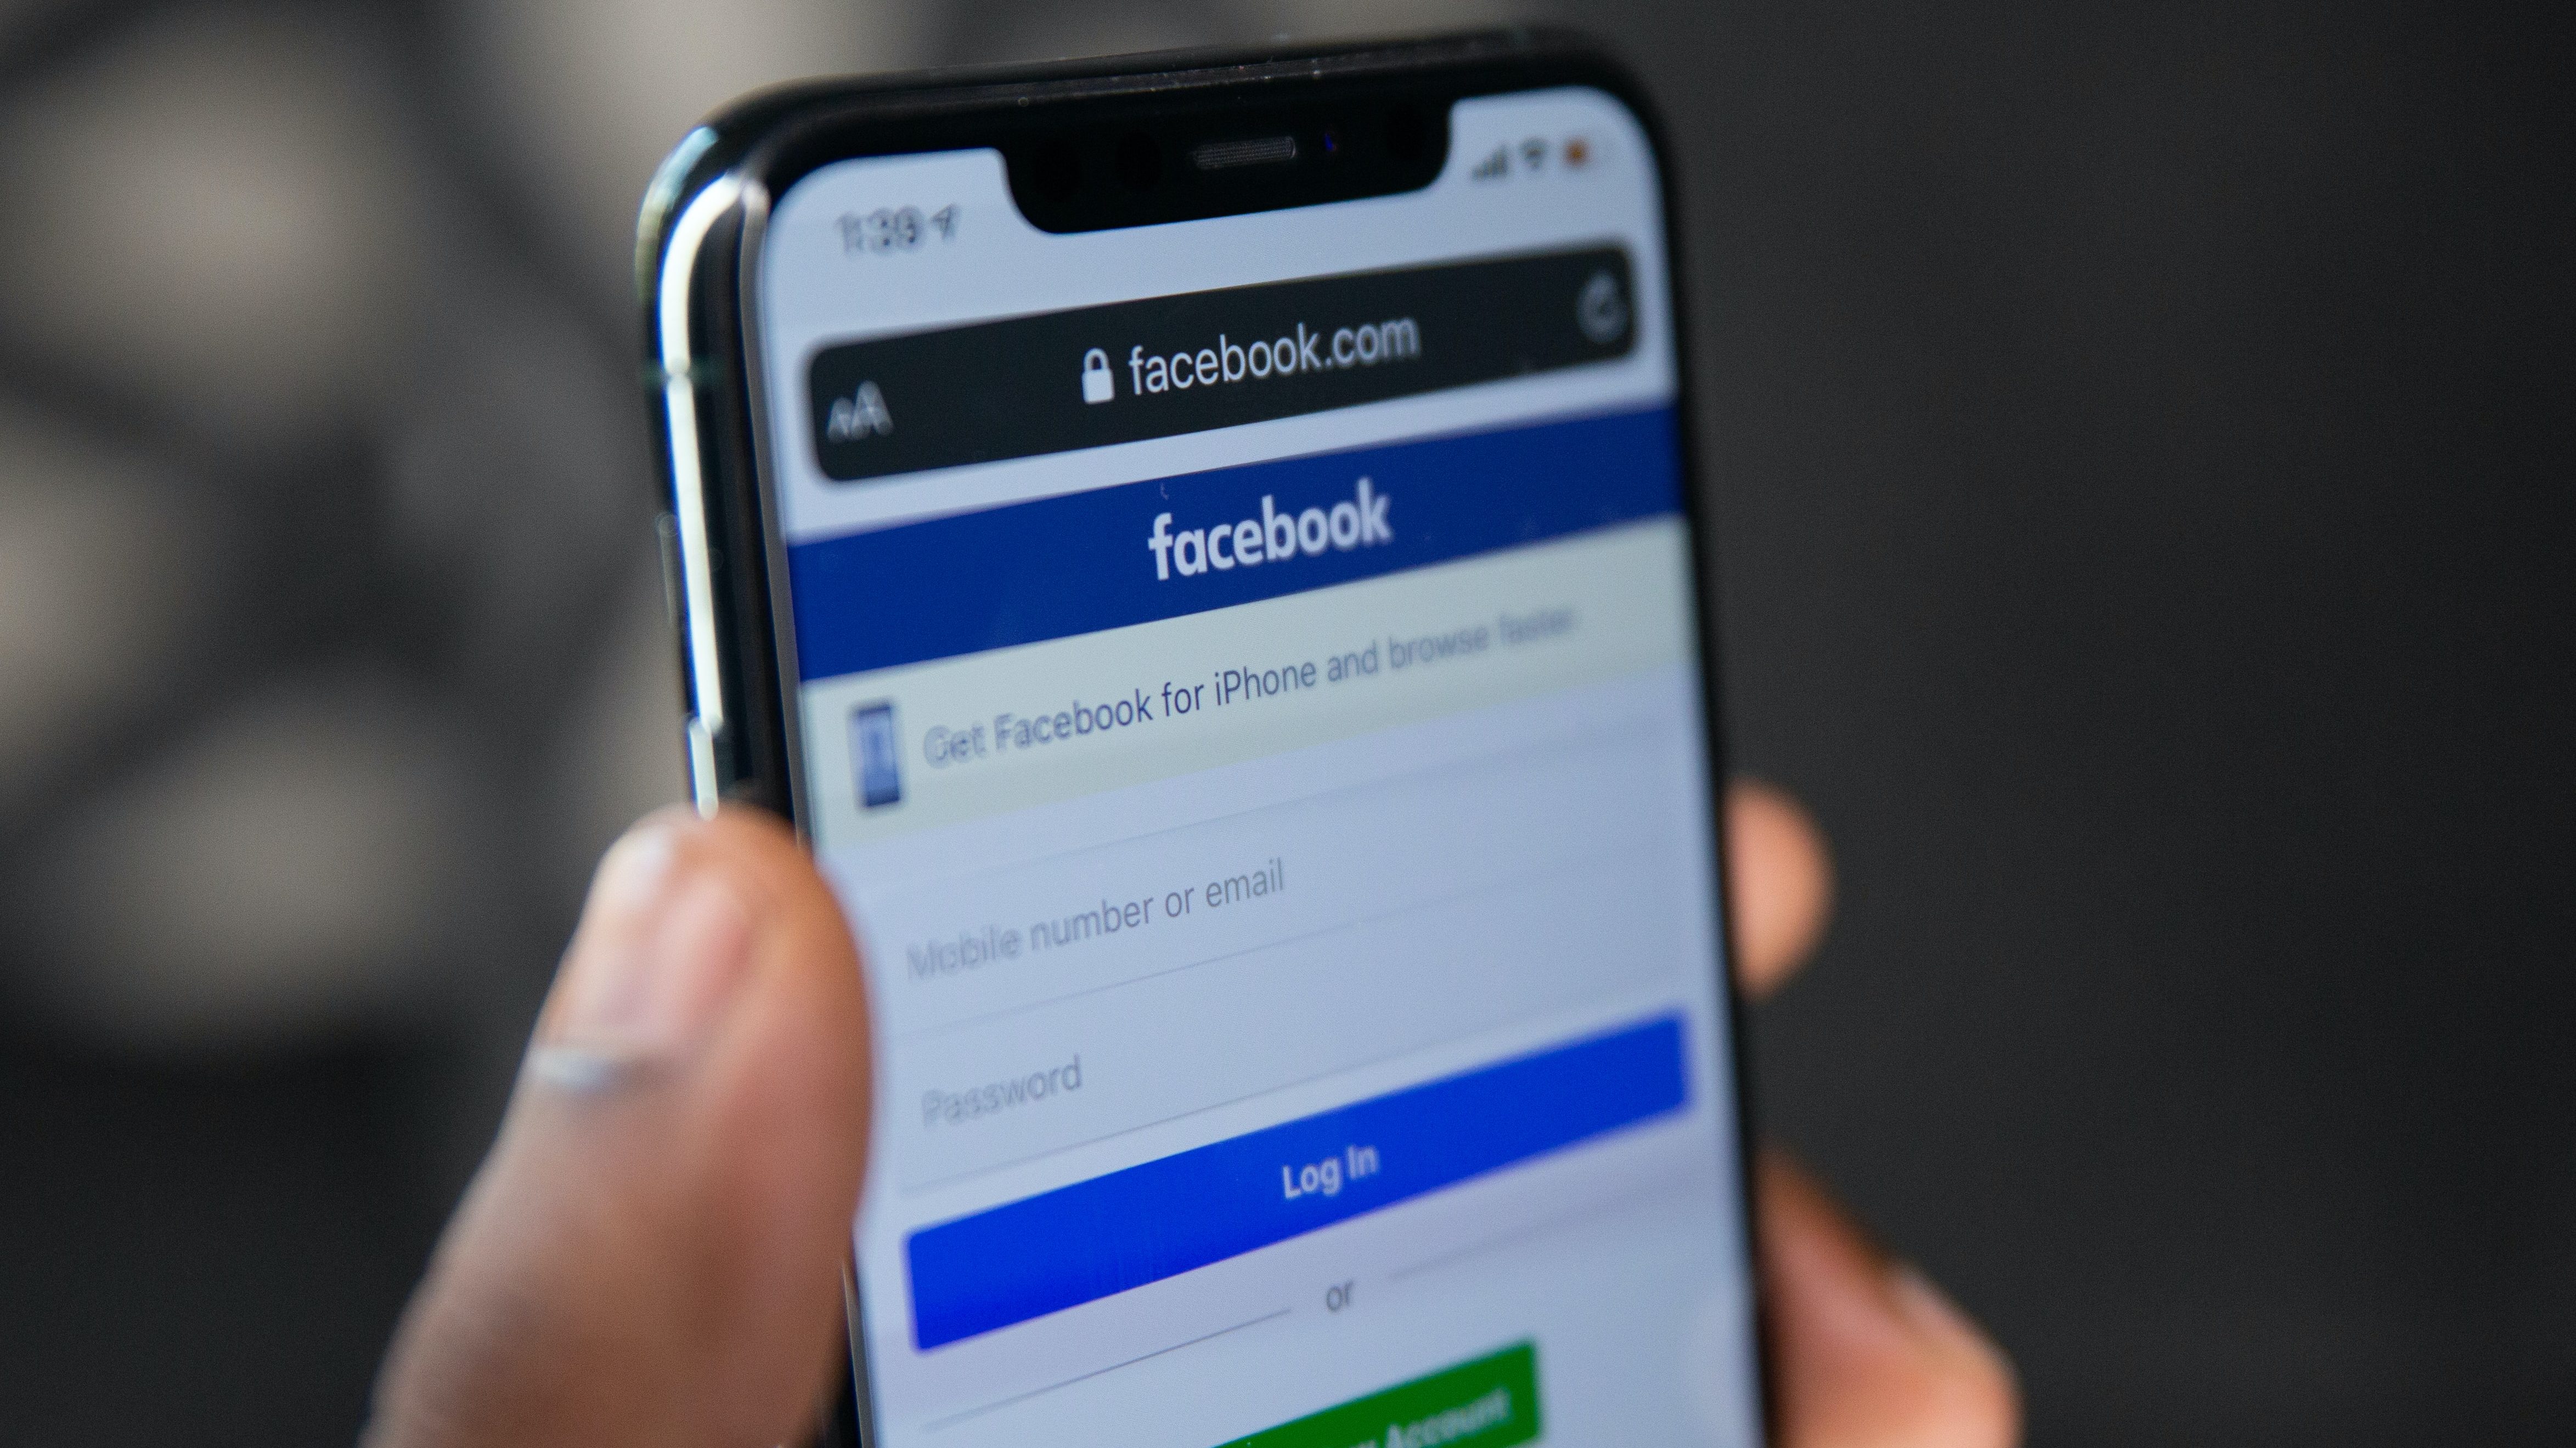 A black person's hand holding a cell phone with the Facebook mobile log-in screen pulled up.